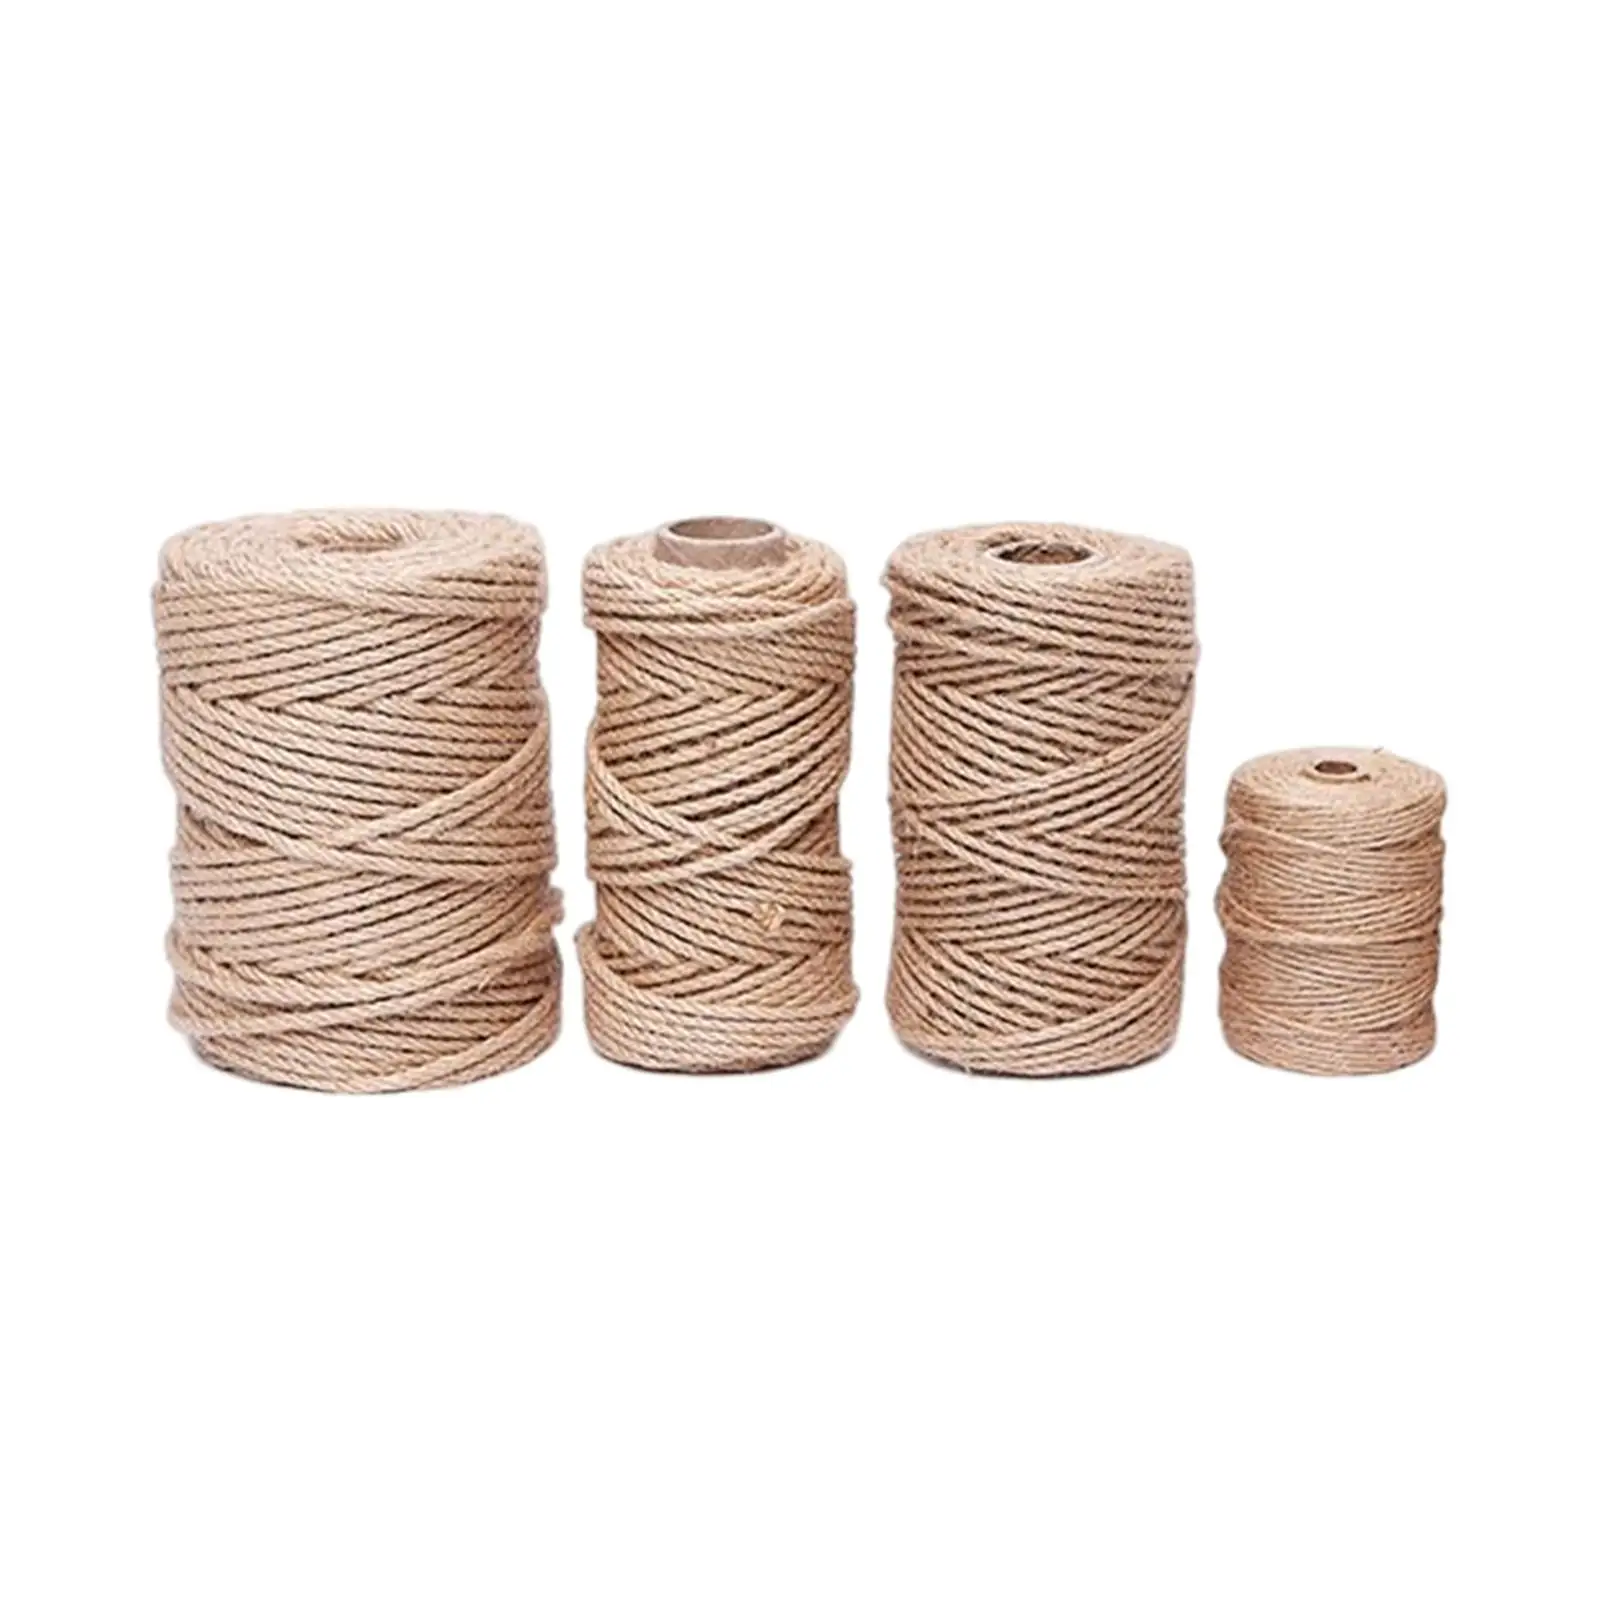 Jute Rope Decorative Replacement Sisal Rope for Cat Toys Scratching Post Home Garden Decor Cat Scratcher Rope Gift Packing